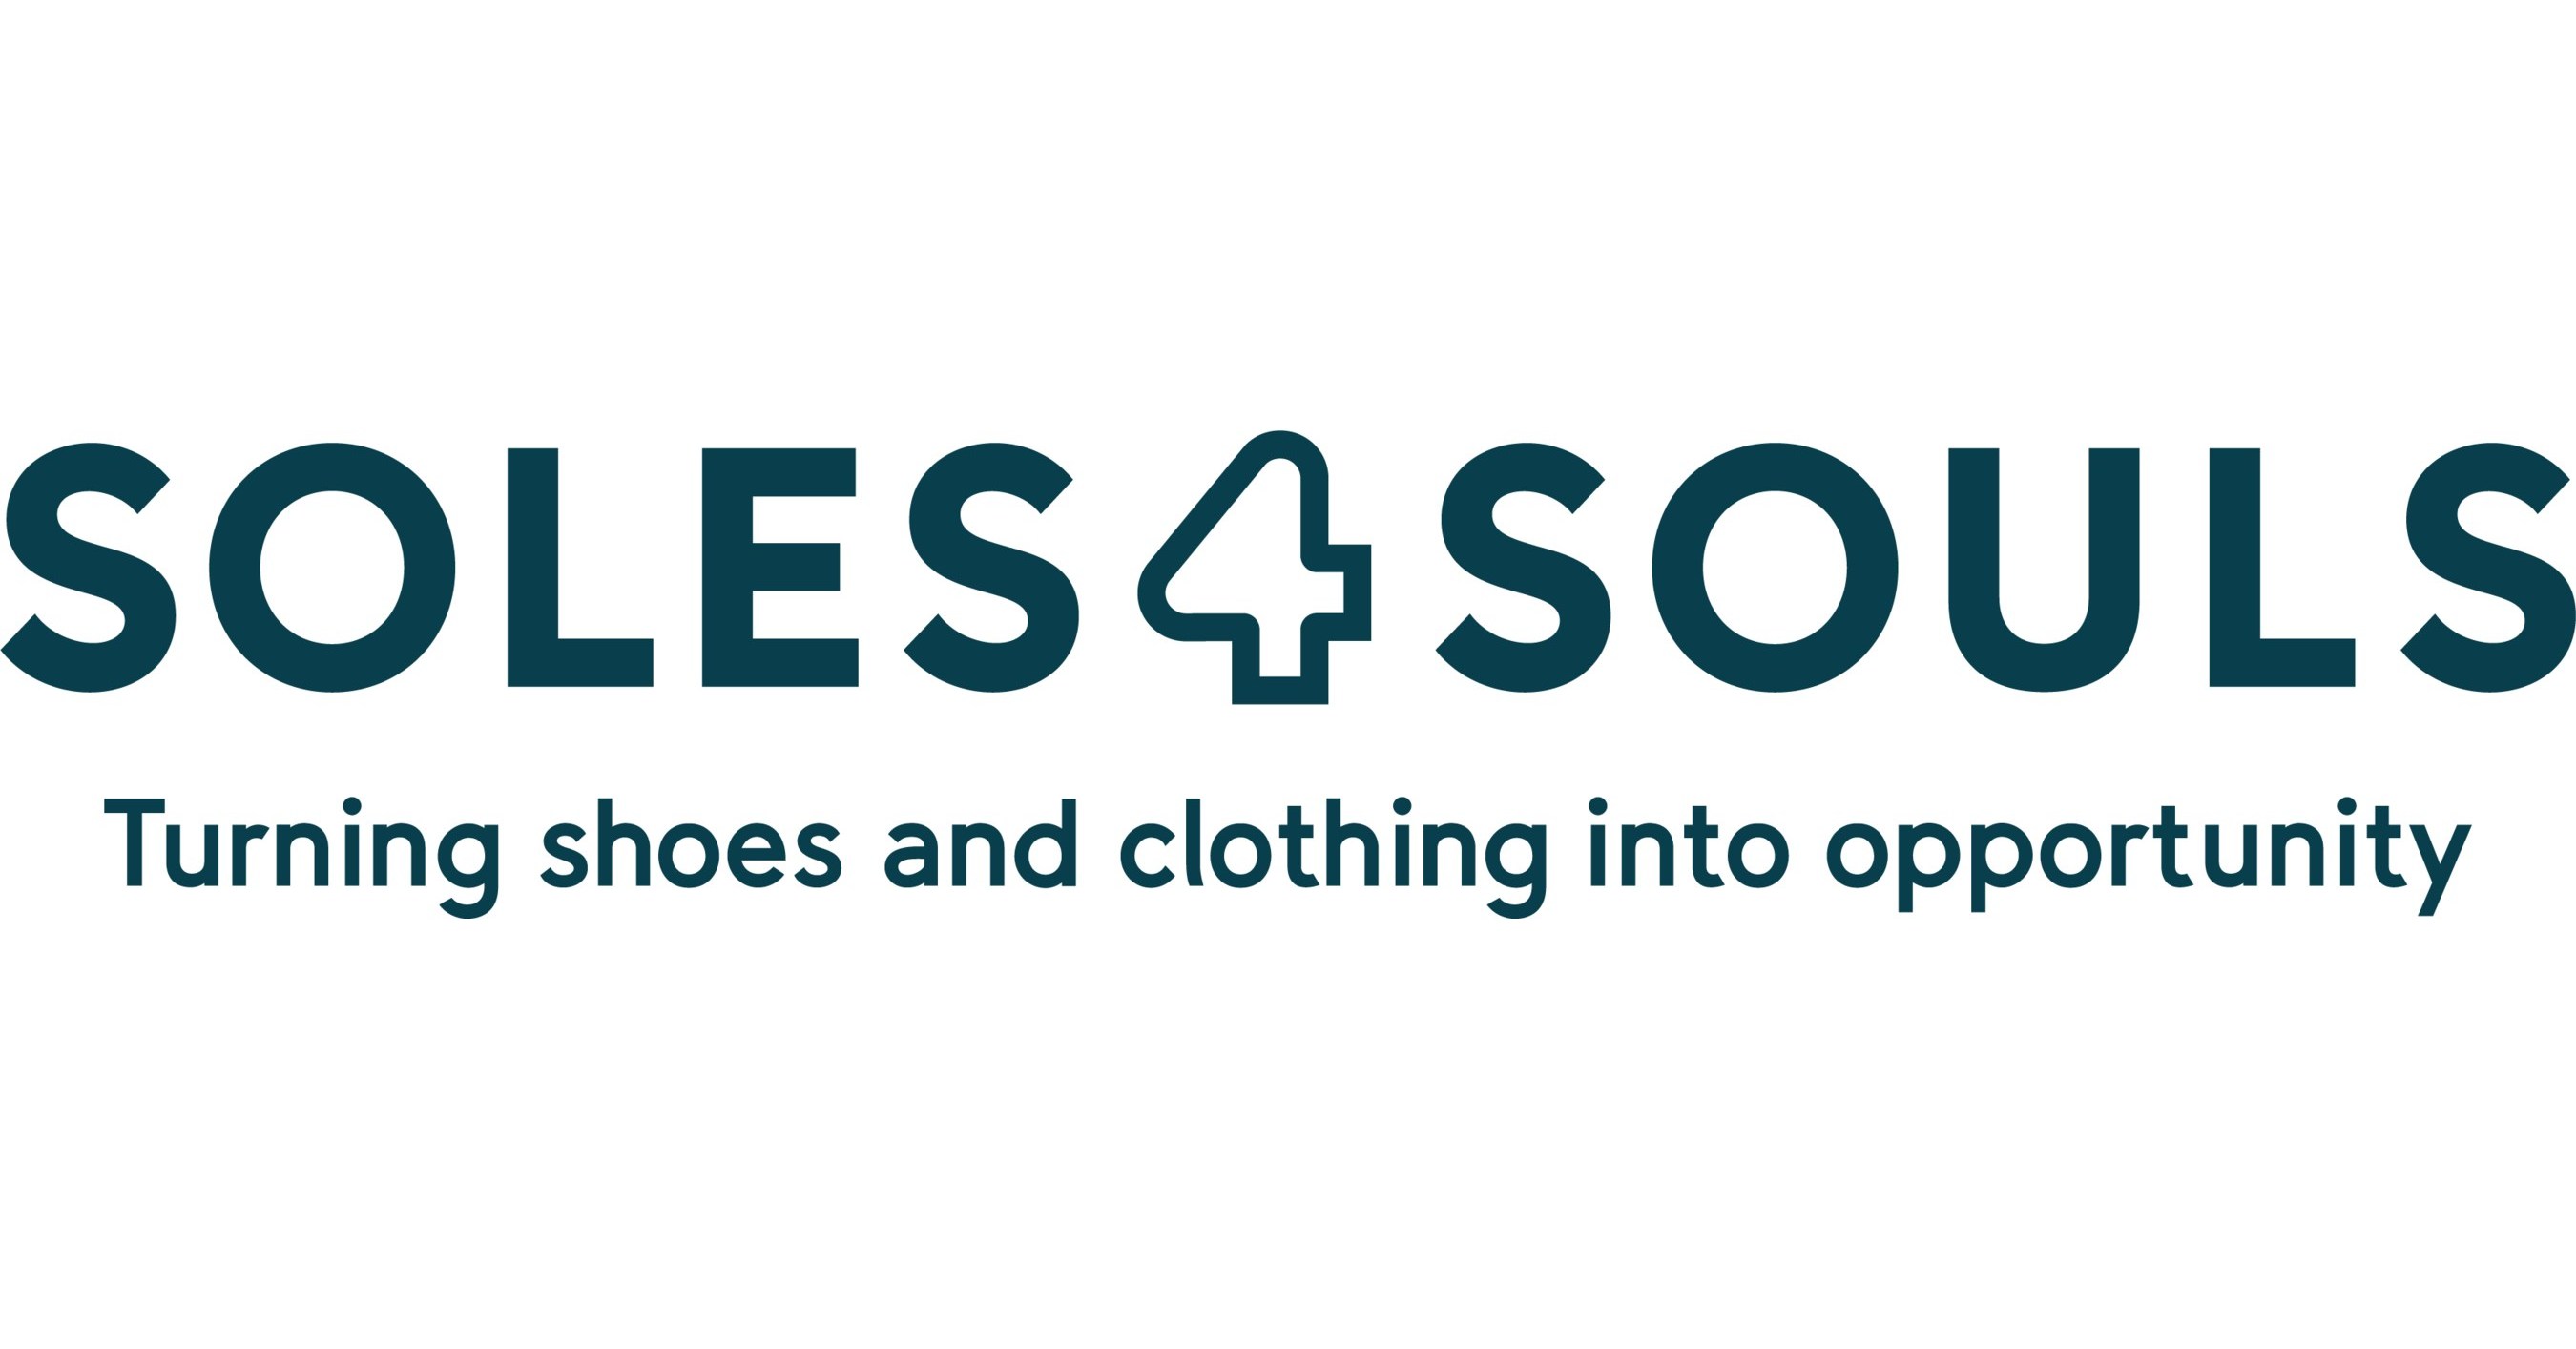 Soles4Souls turns unwanted shoes into opportunity by keeping them